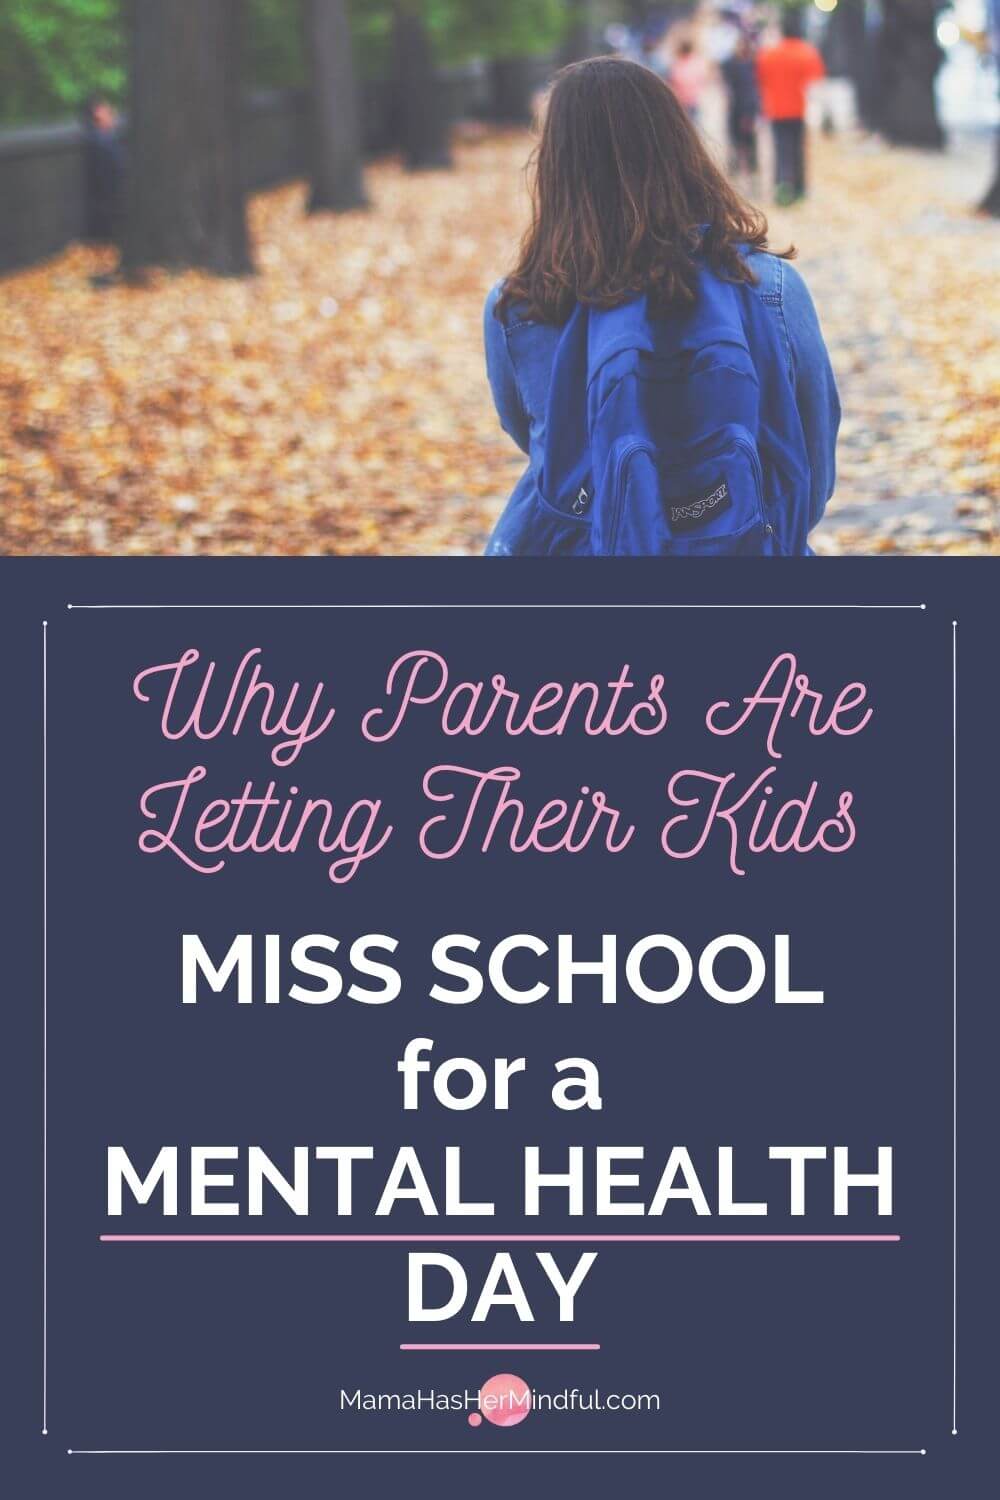 Why Parents Are Letting Their Kids Miss School for a Mental Health Day